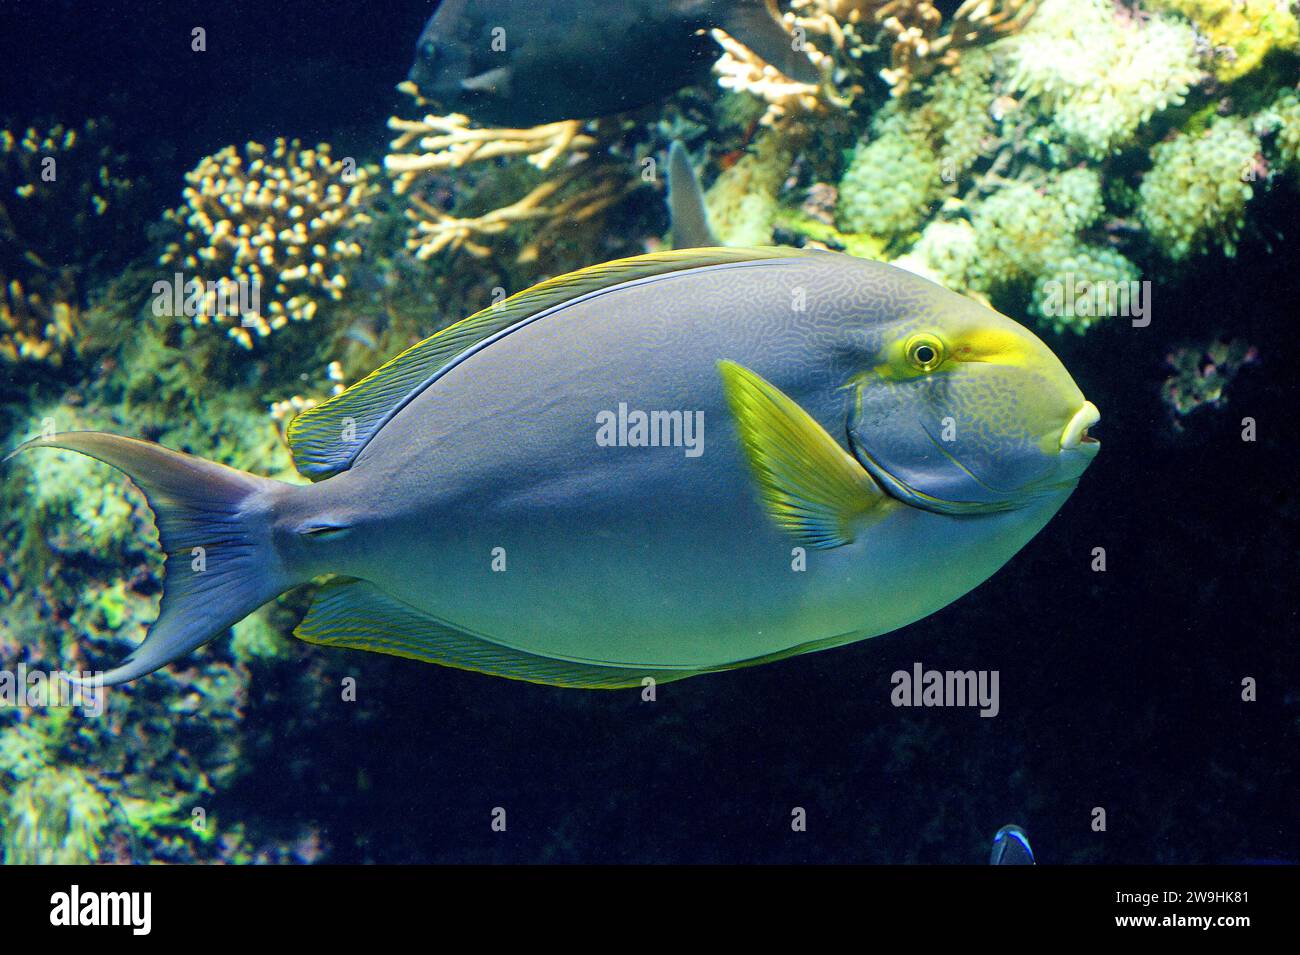 Yellowfin surgeonfish (Acanthurus xanthopterus) is a sea tropical fish native to coral reefs. Stock Photo